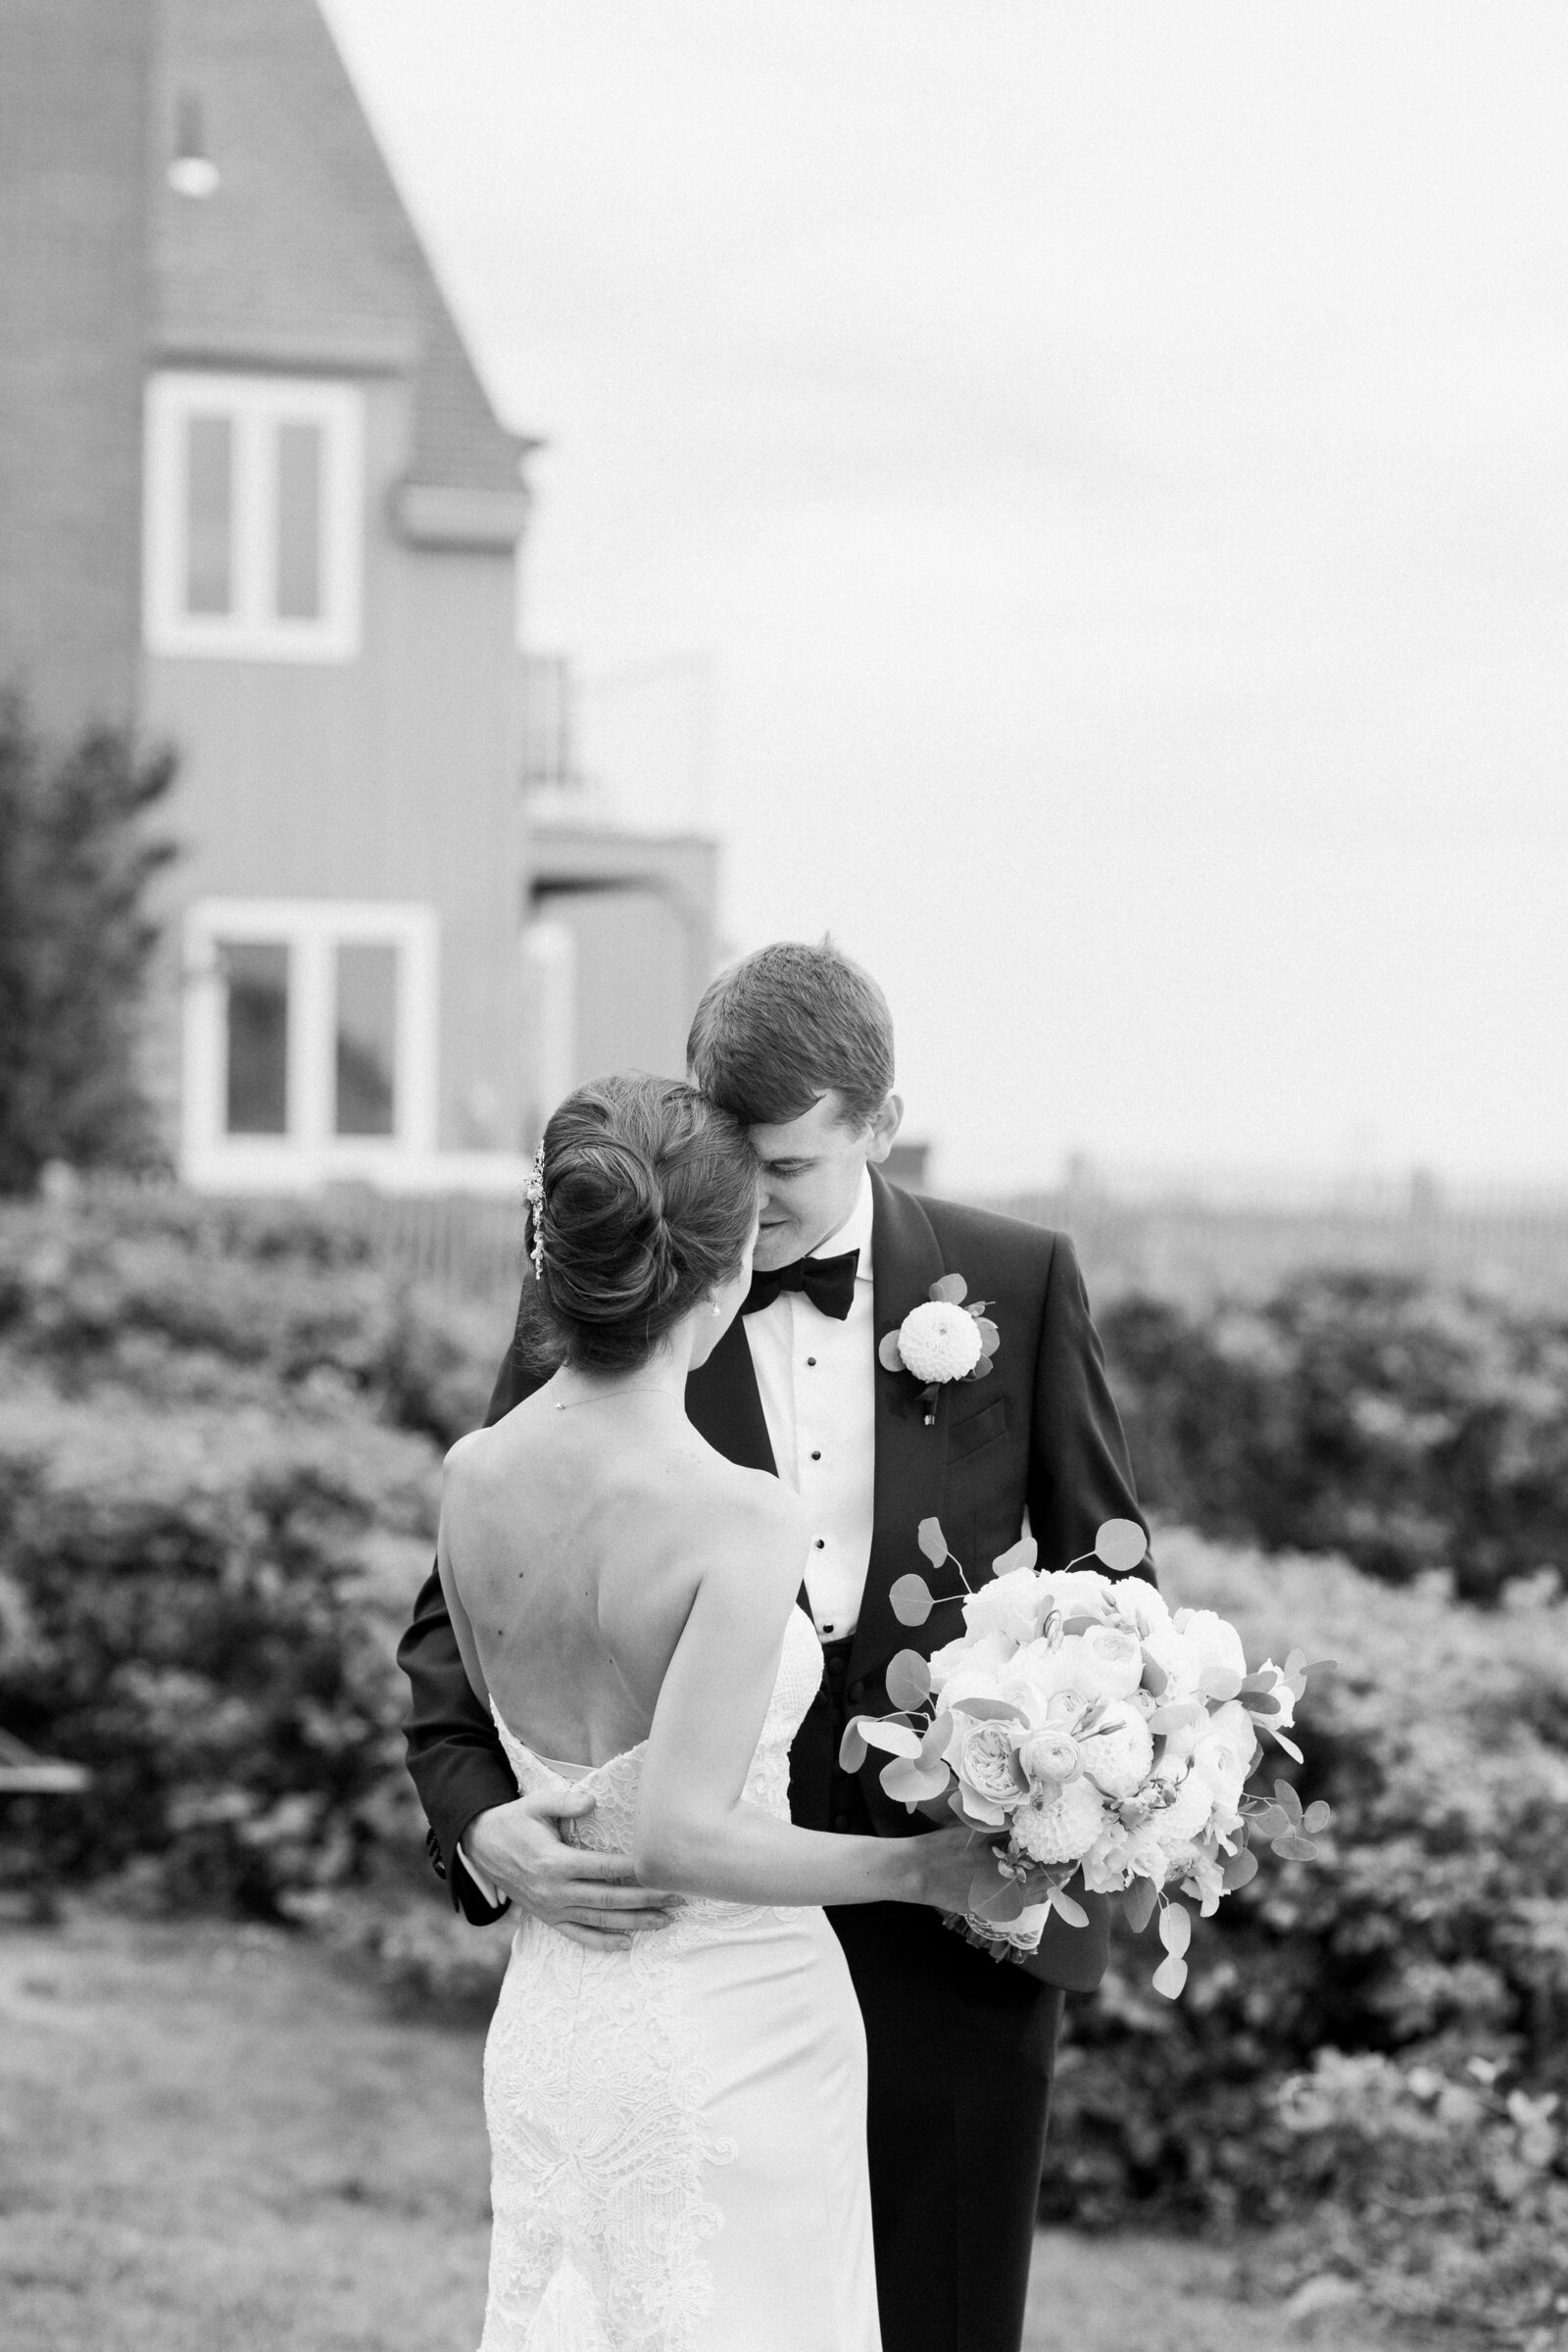 Wedding couple with their arms around each other and their foreheads touching.